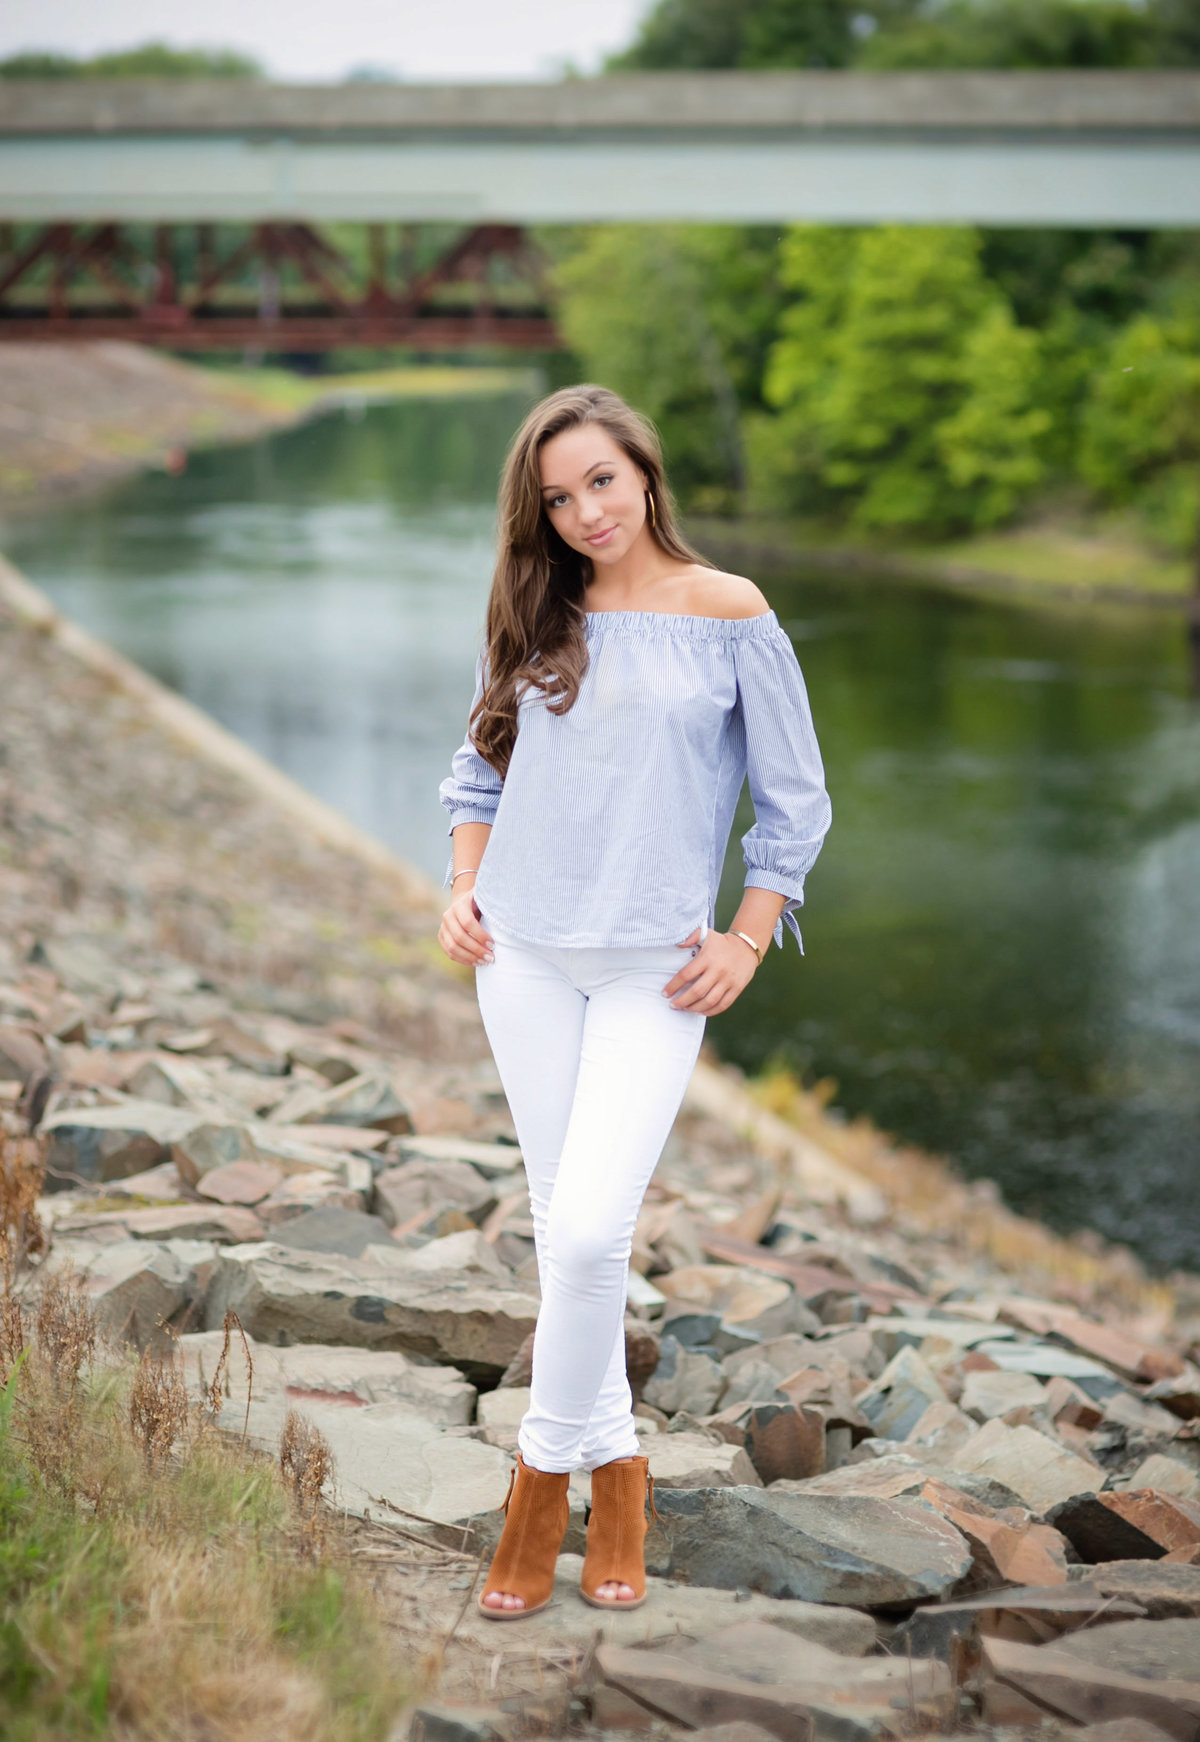 where to get senior pictures near me